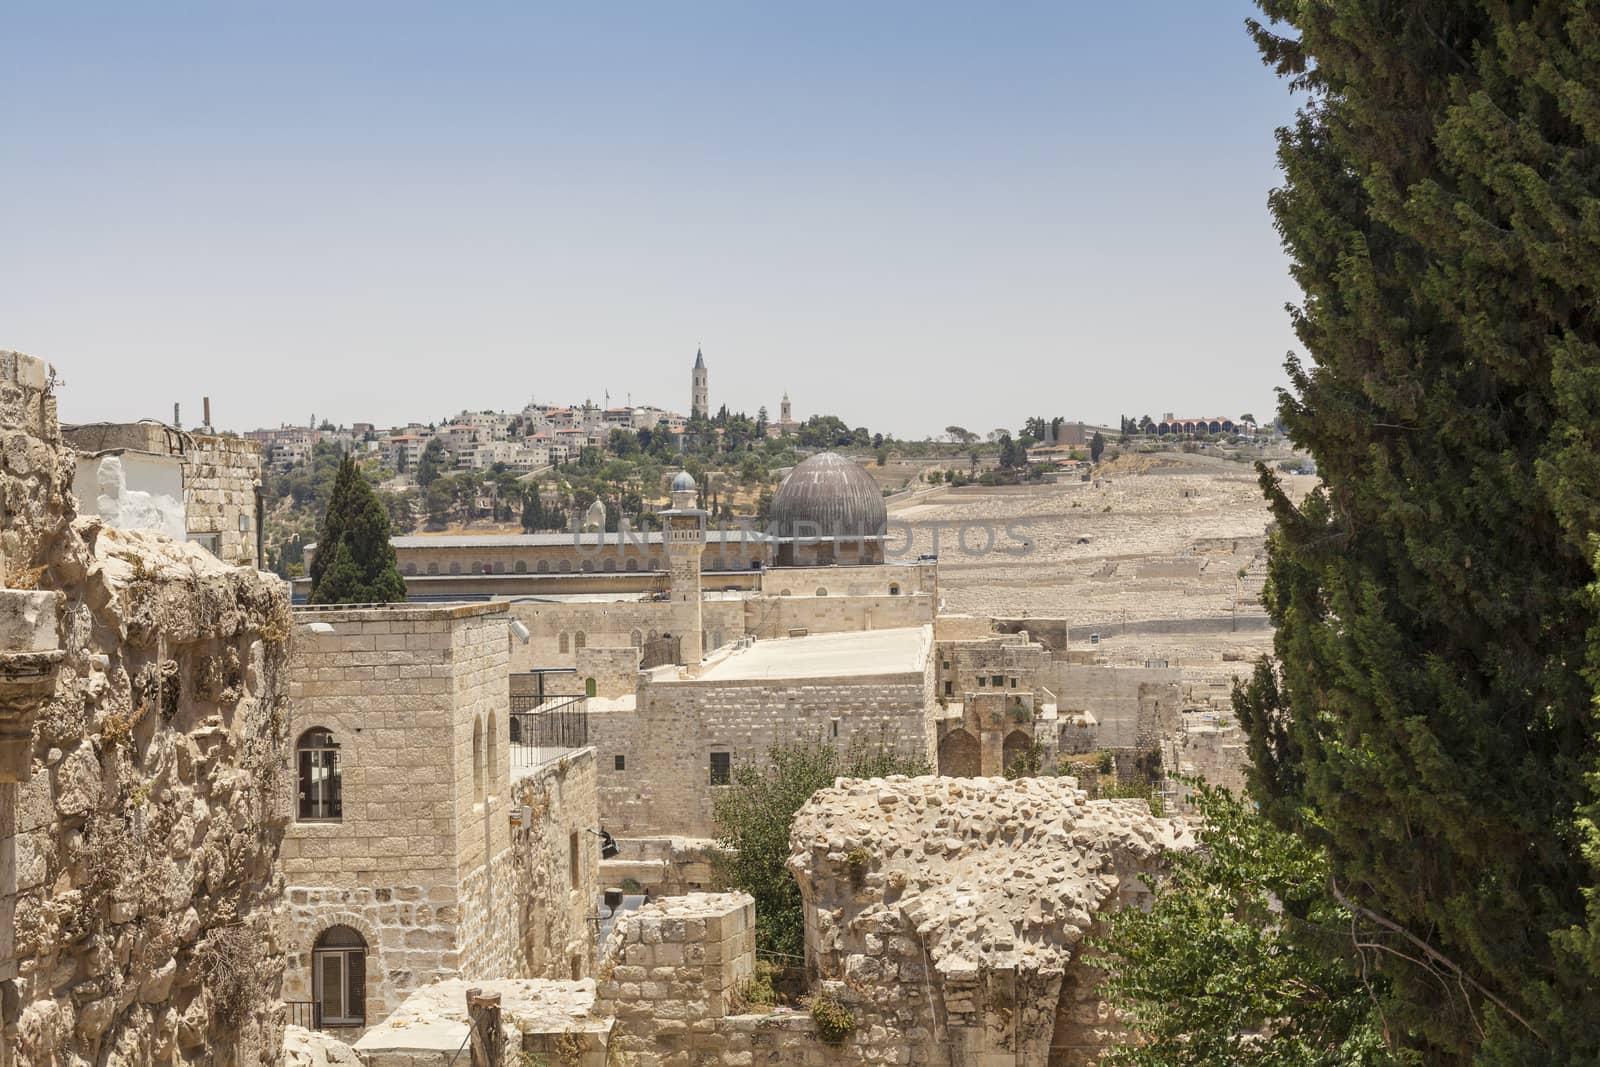 View of the old city of Jerusalem